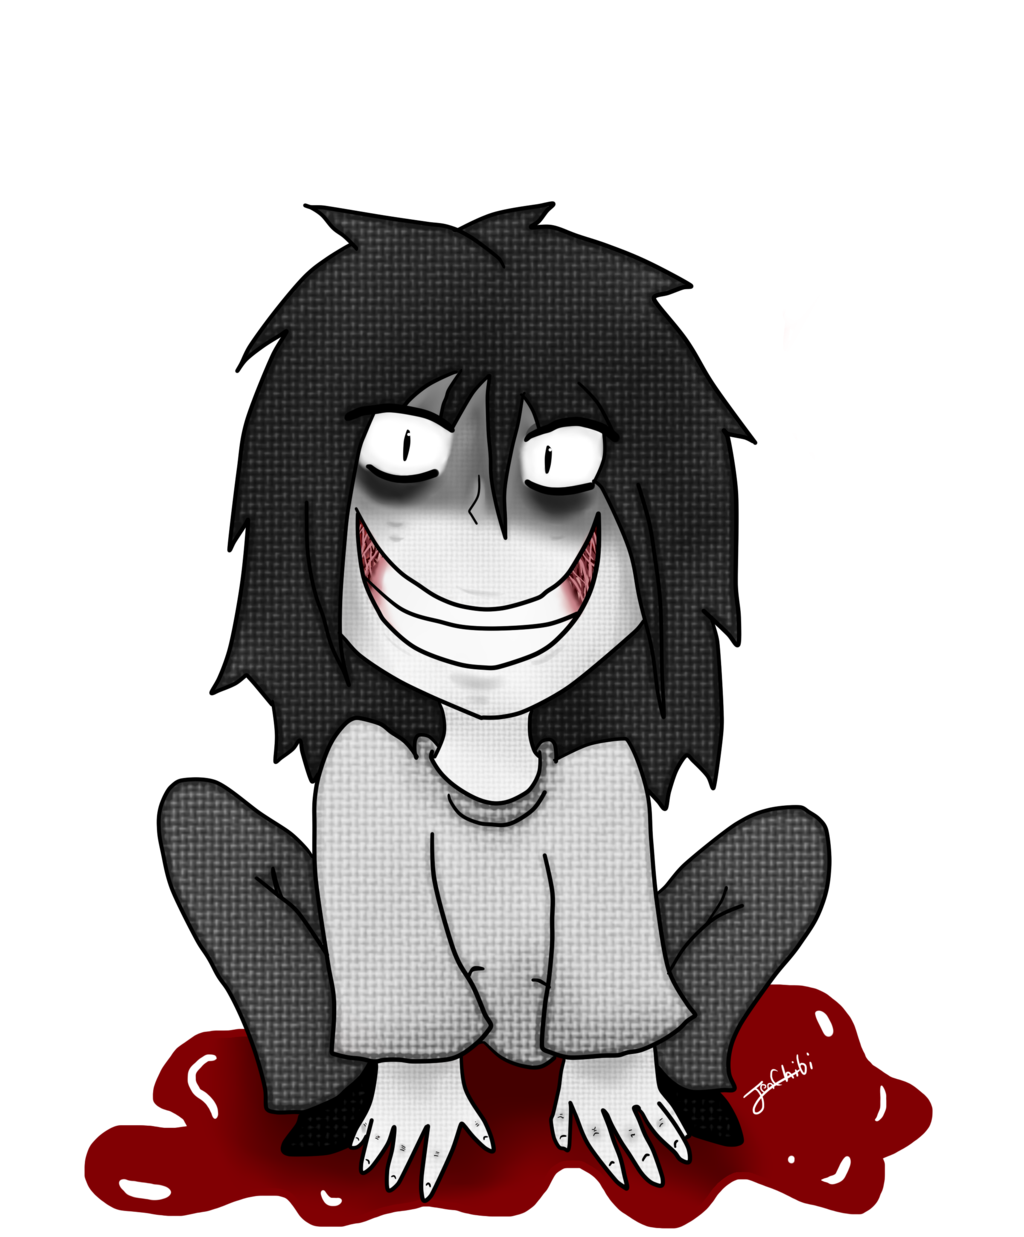 Find more The cute jeff the killer by JenChibi. 